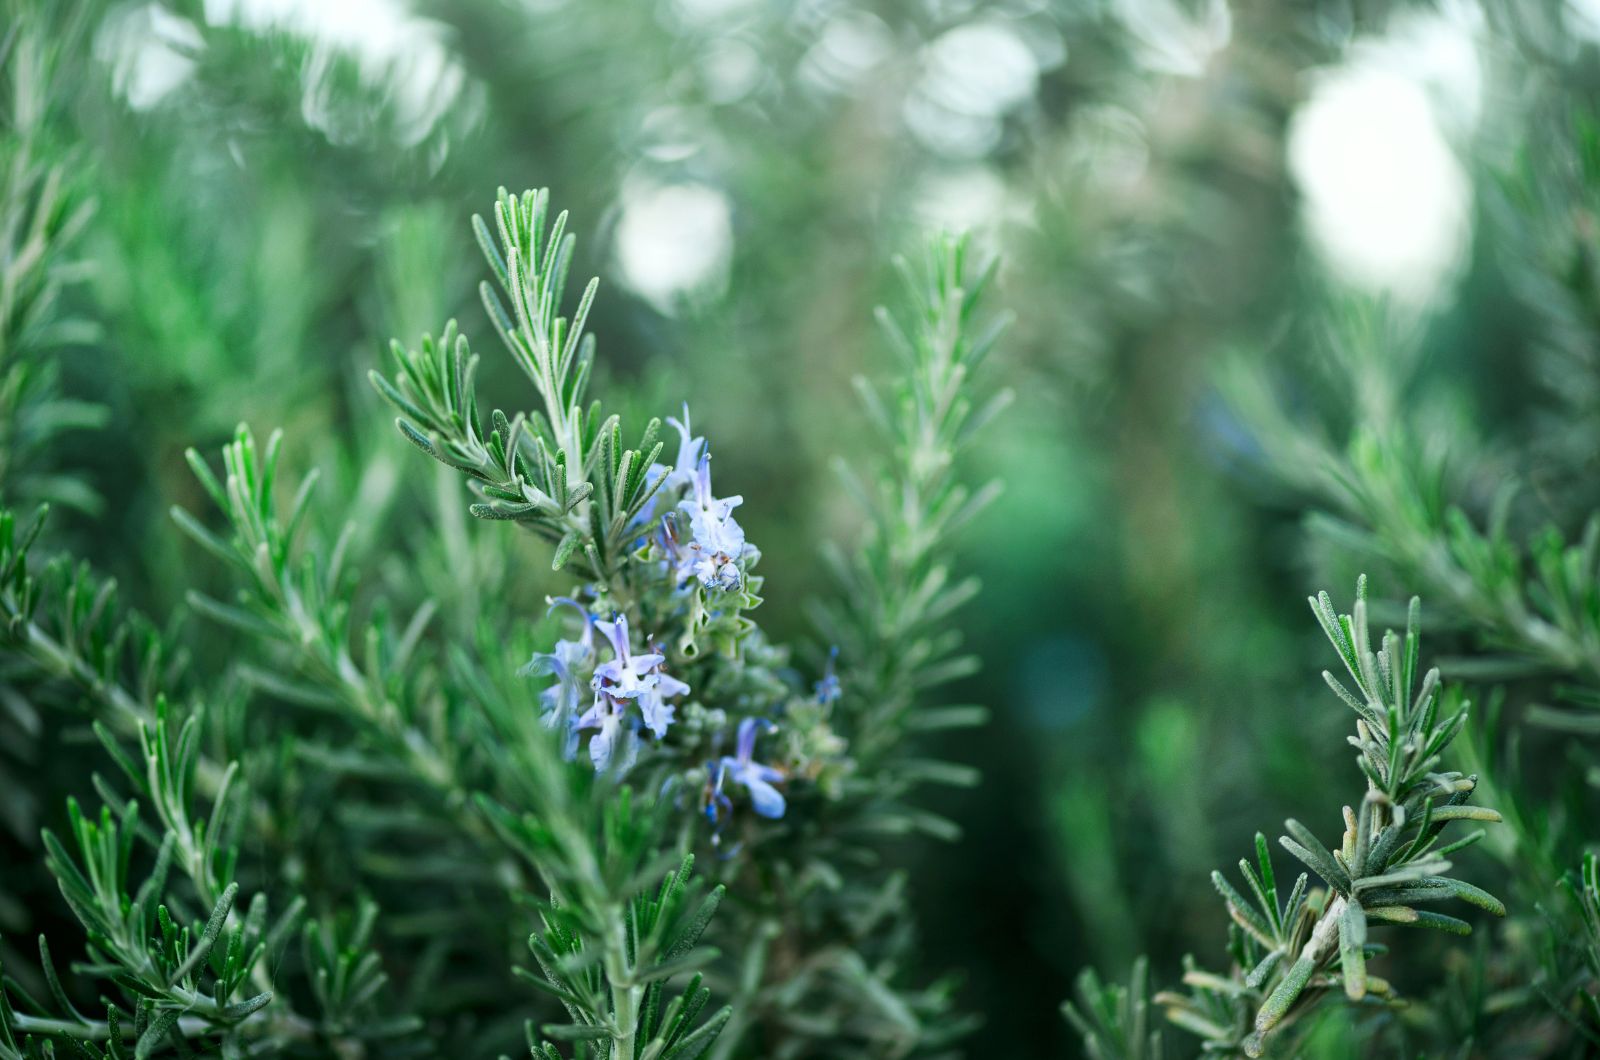 rosemary plant in bloom